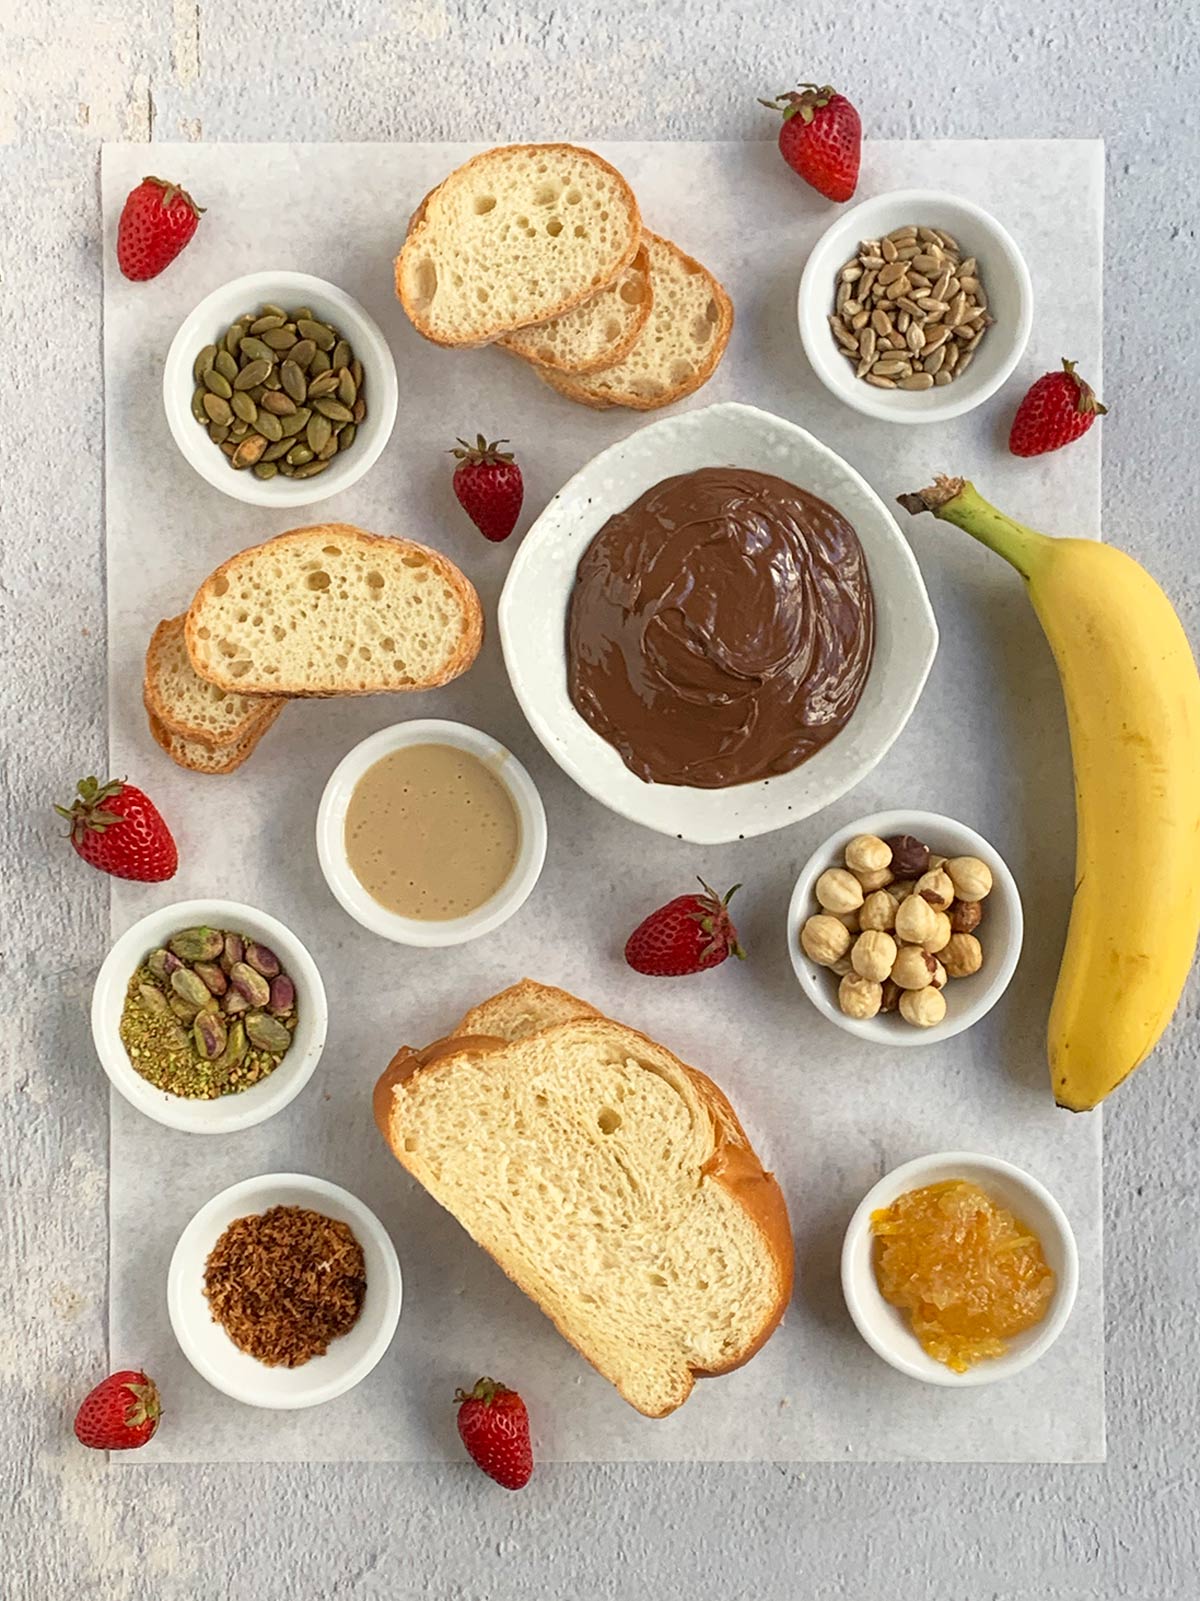 All  the ingredients for nutella toasts including mini bowls for the toppings,